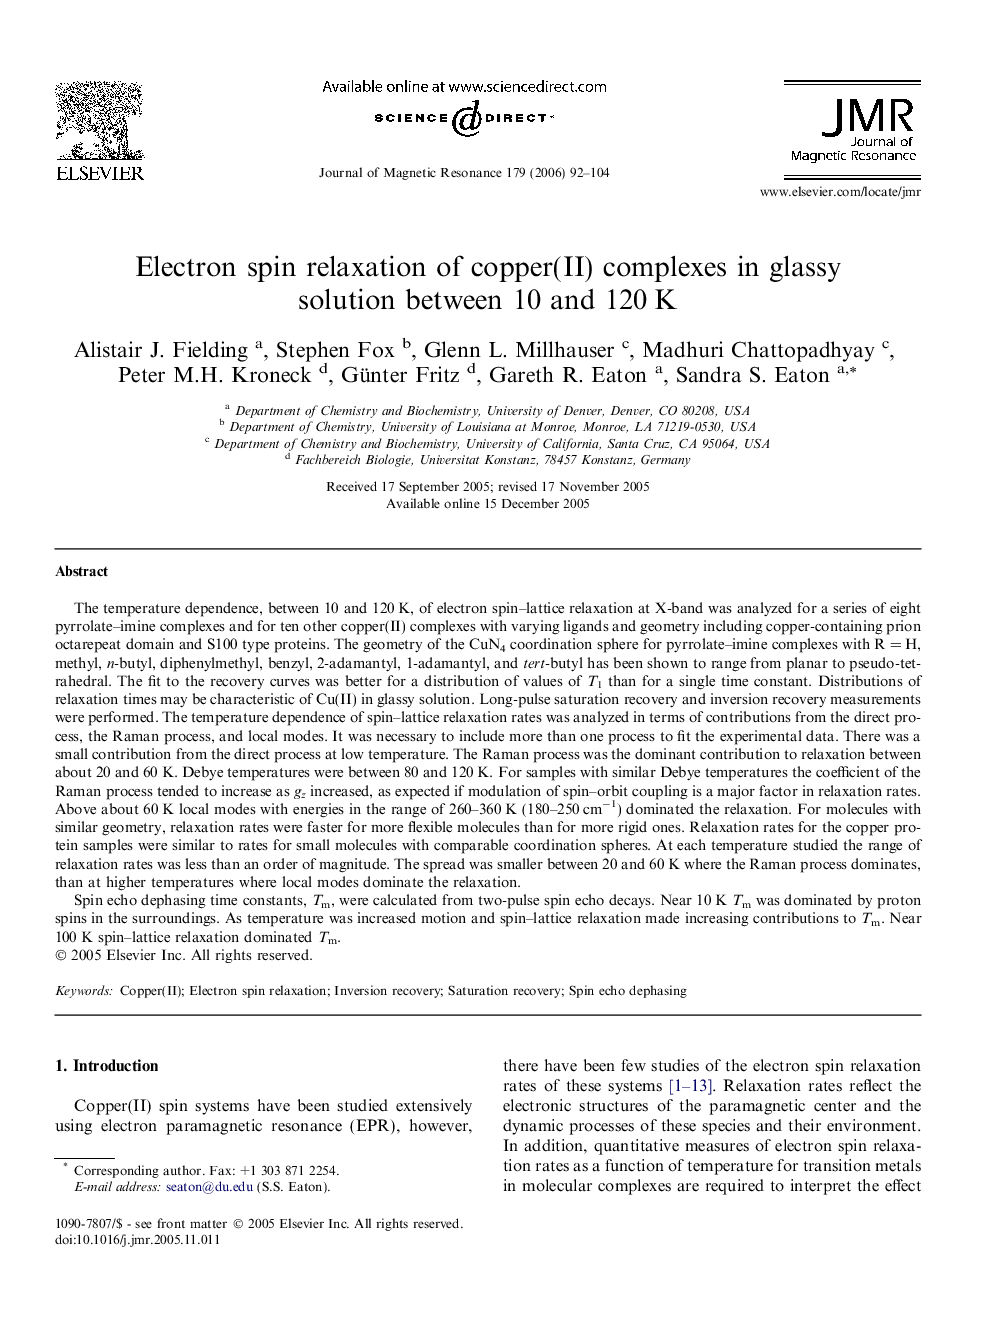 Electron spin relaxation of copper(II) complexes in glassy solution between 10 and 120Â K